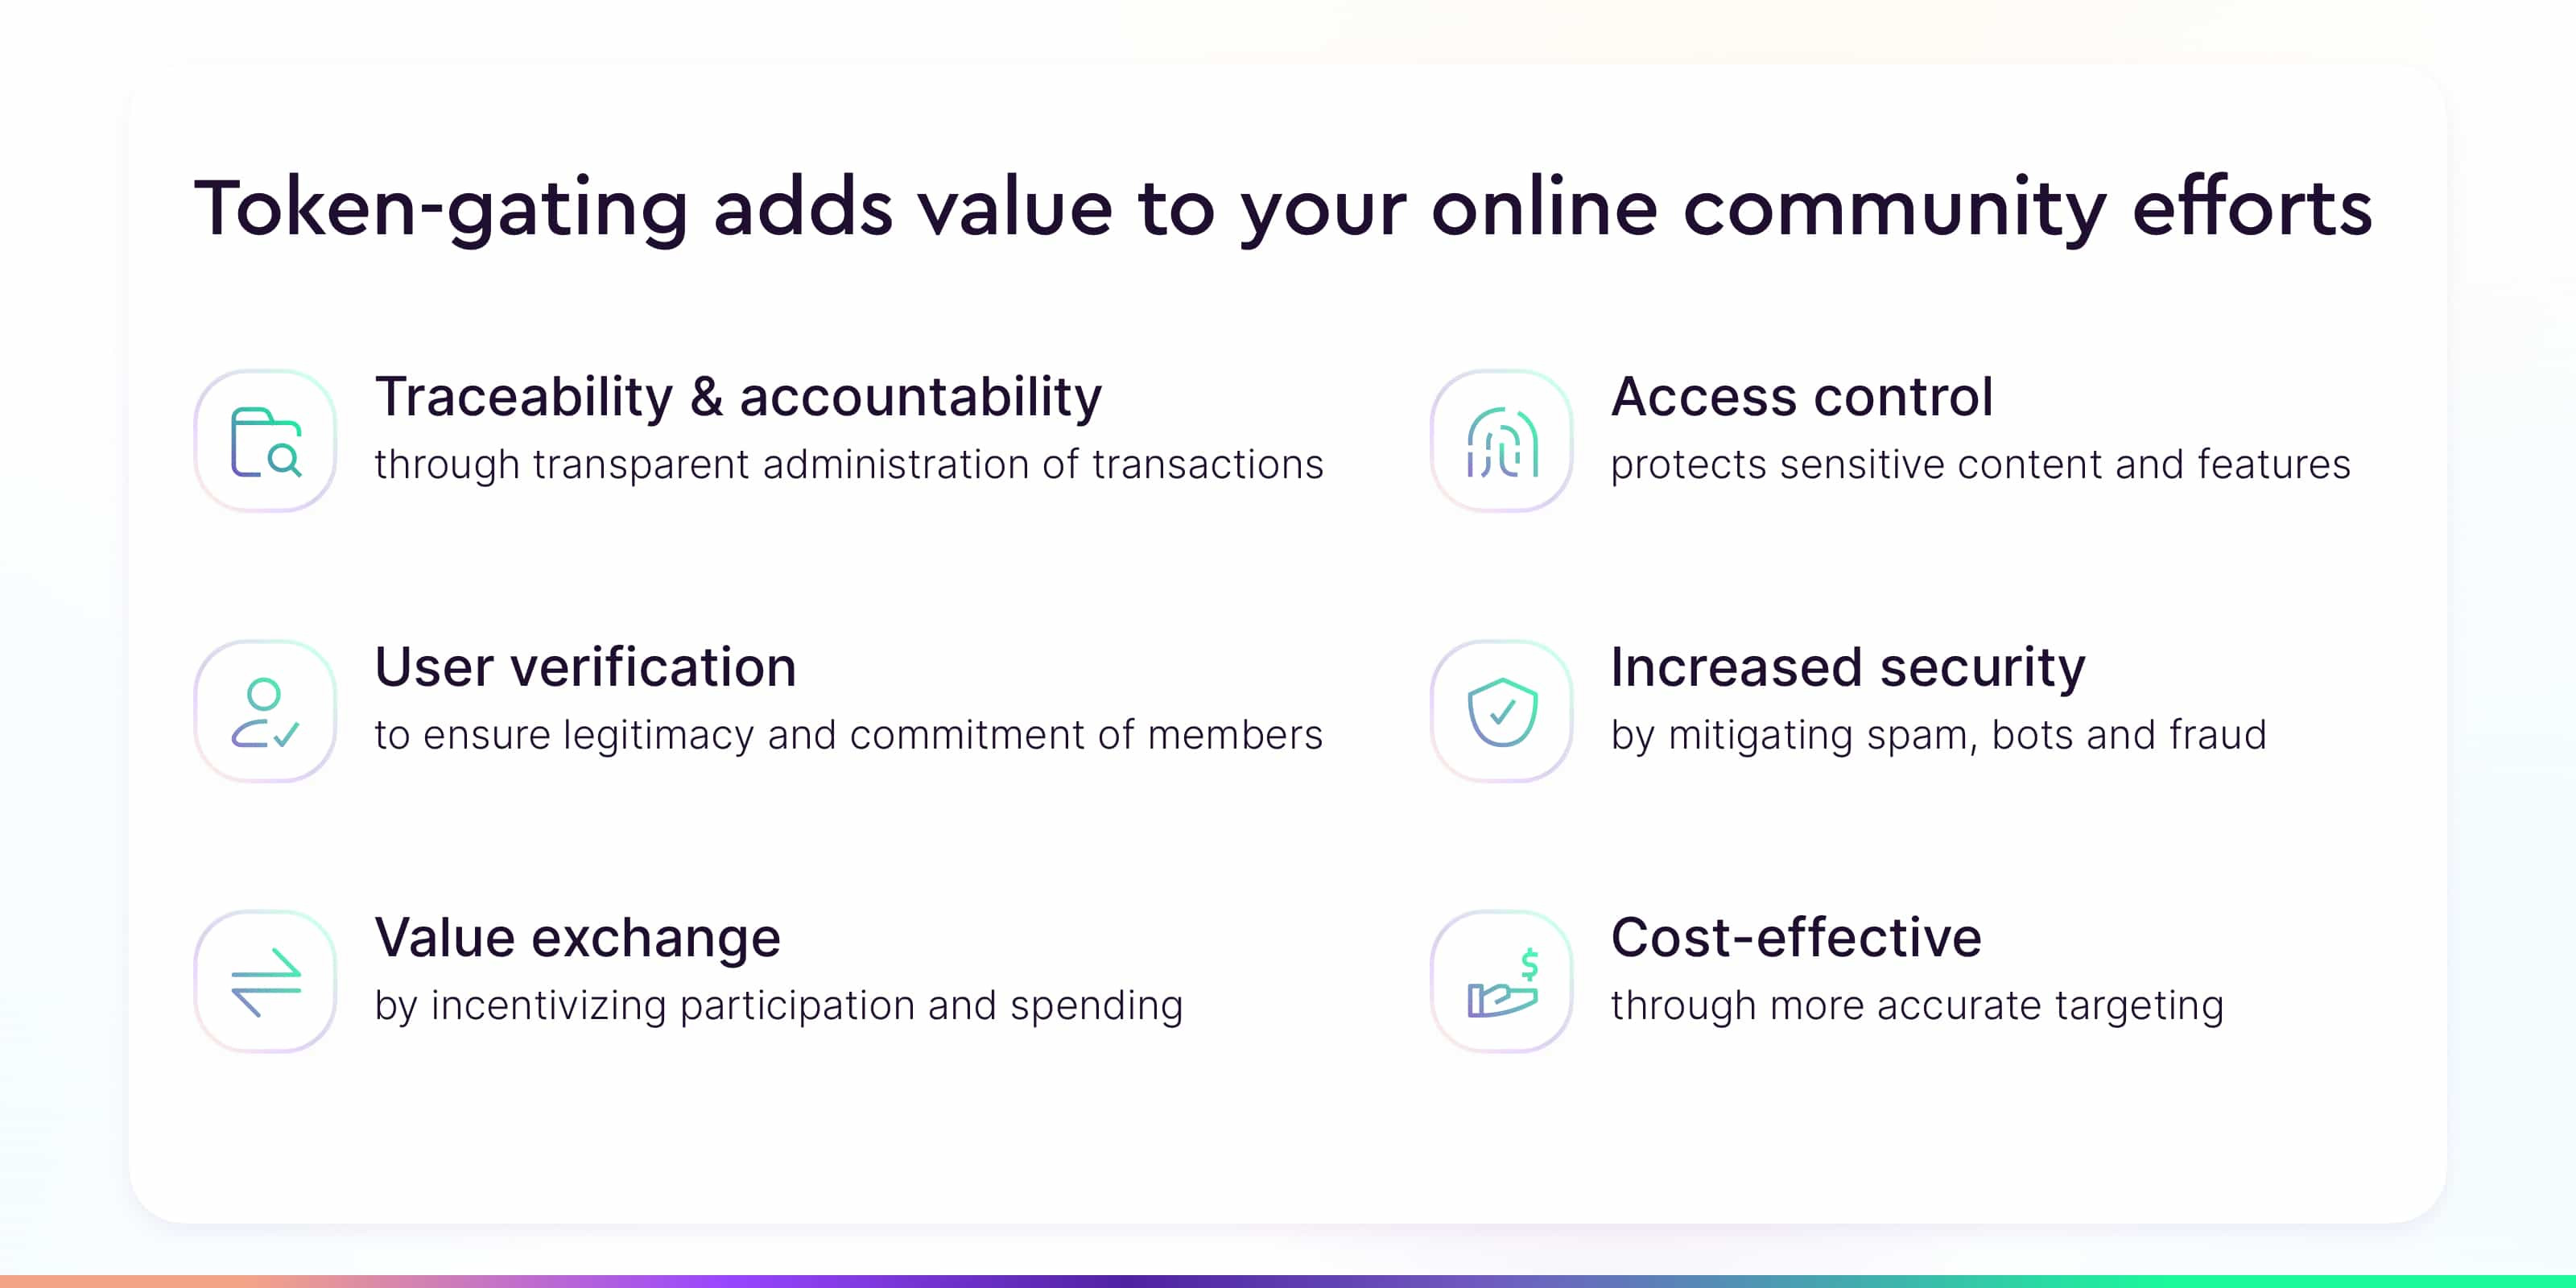 token-gating adds value to your online community efforts through a token-gated community